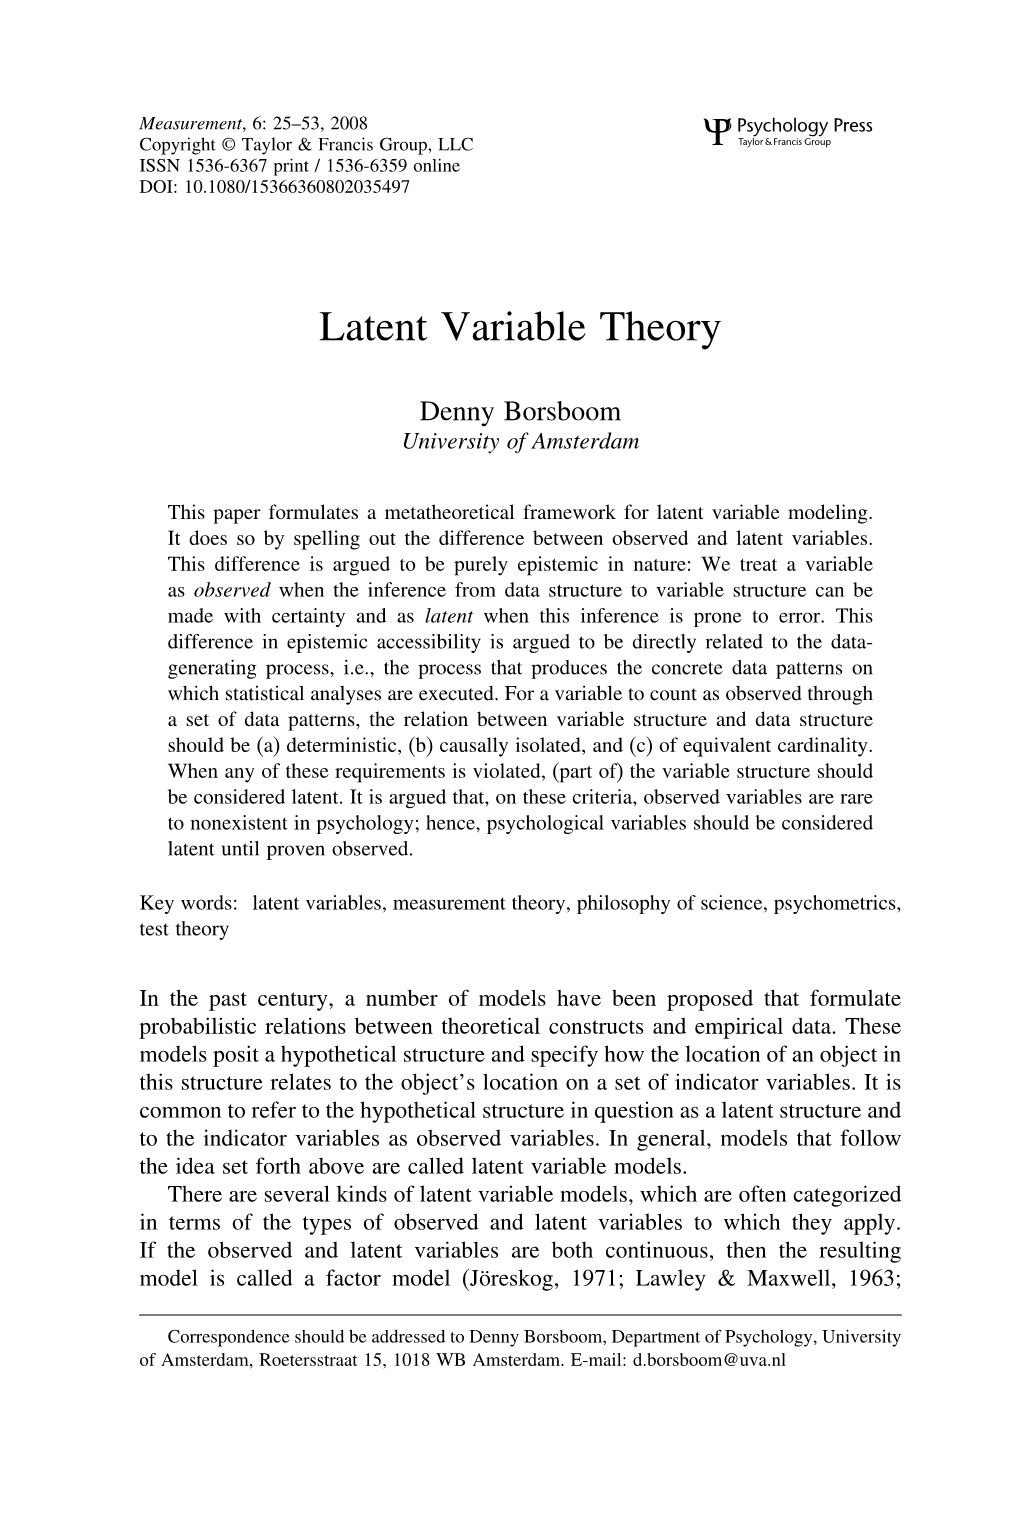 Latent Variable Theory